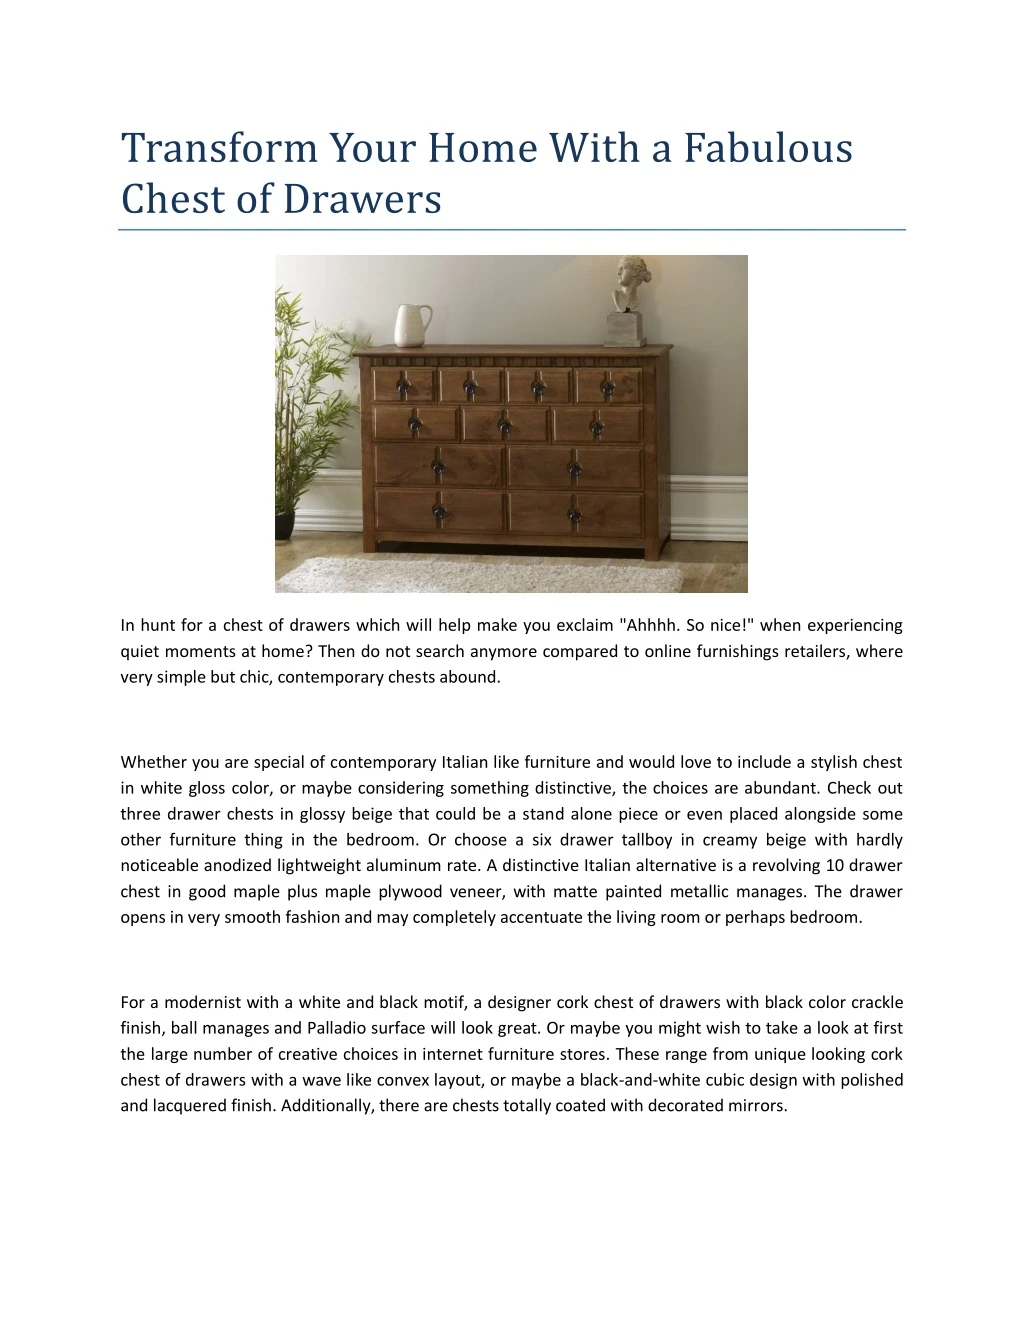 transform your home with a fabulous chest